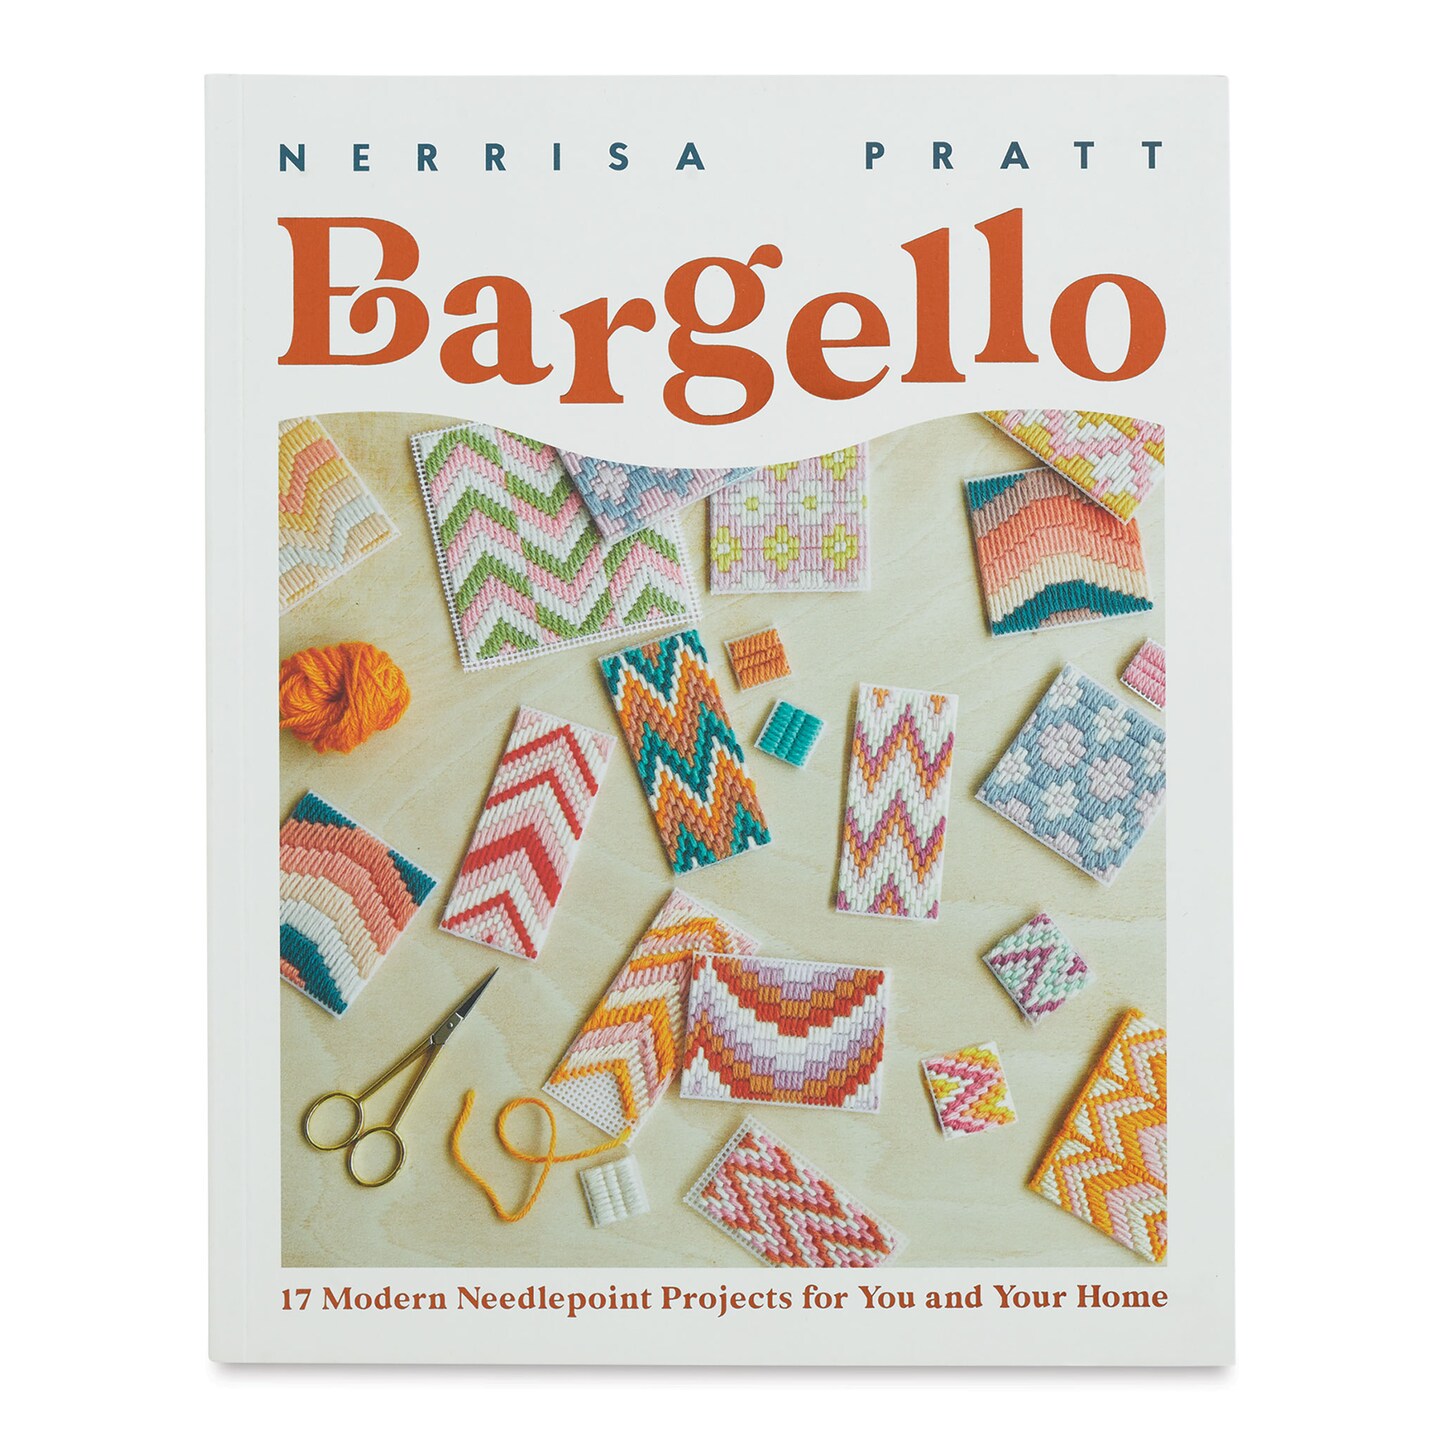 Bargello: 17 Modern Needlepoint Projects for You and Your Home